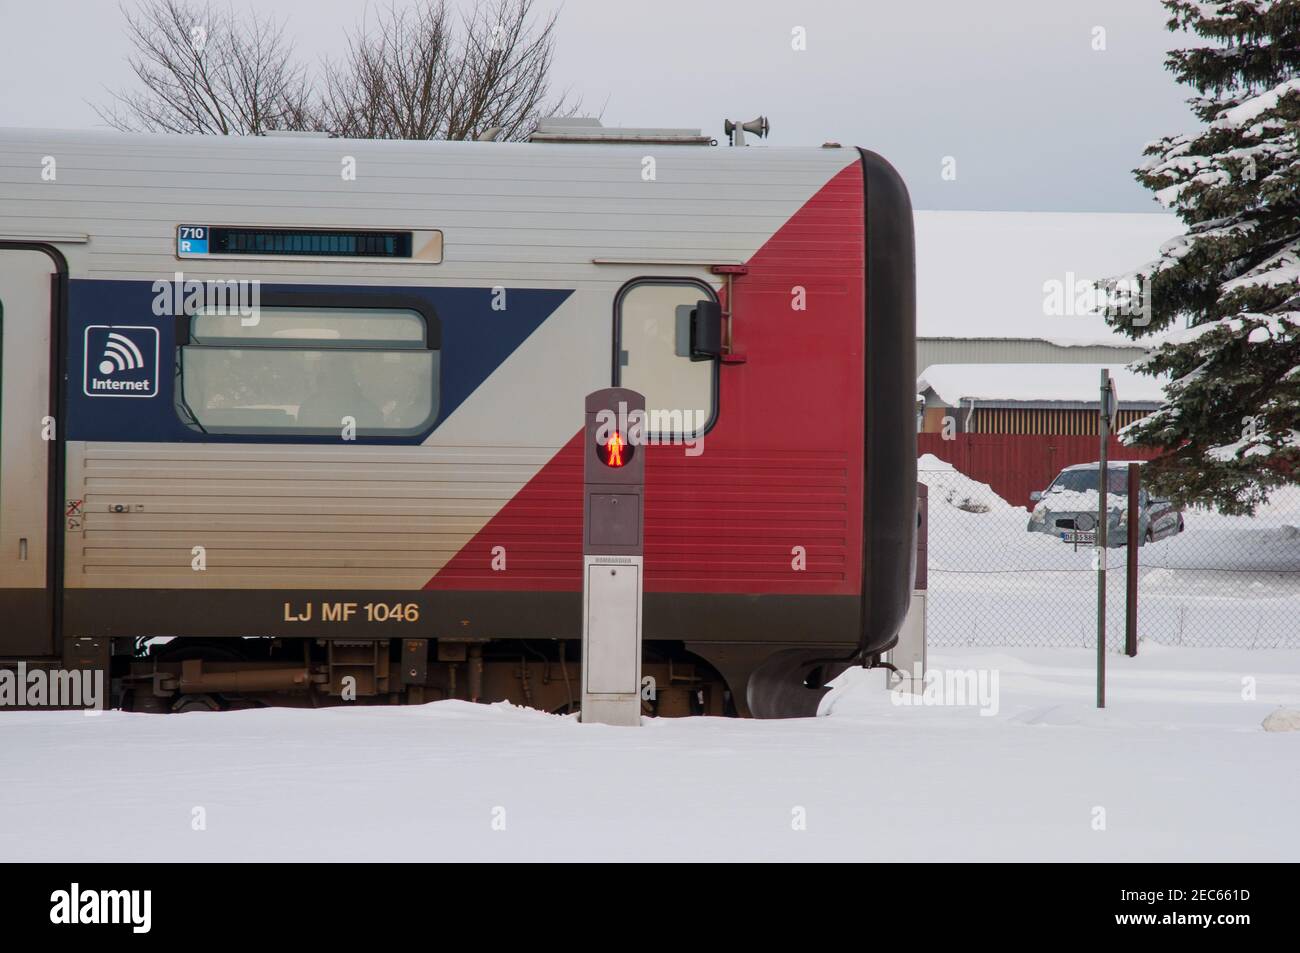 Sollested Denmark - March 3. 2018: Danish IC2 train at Sollested train station Stock Photo